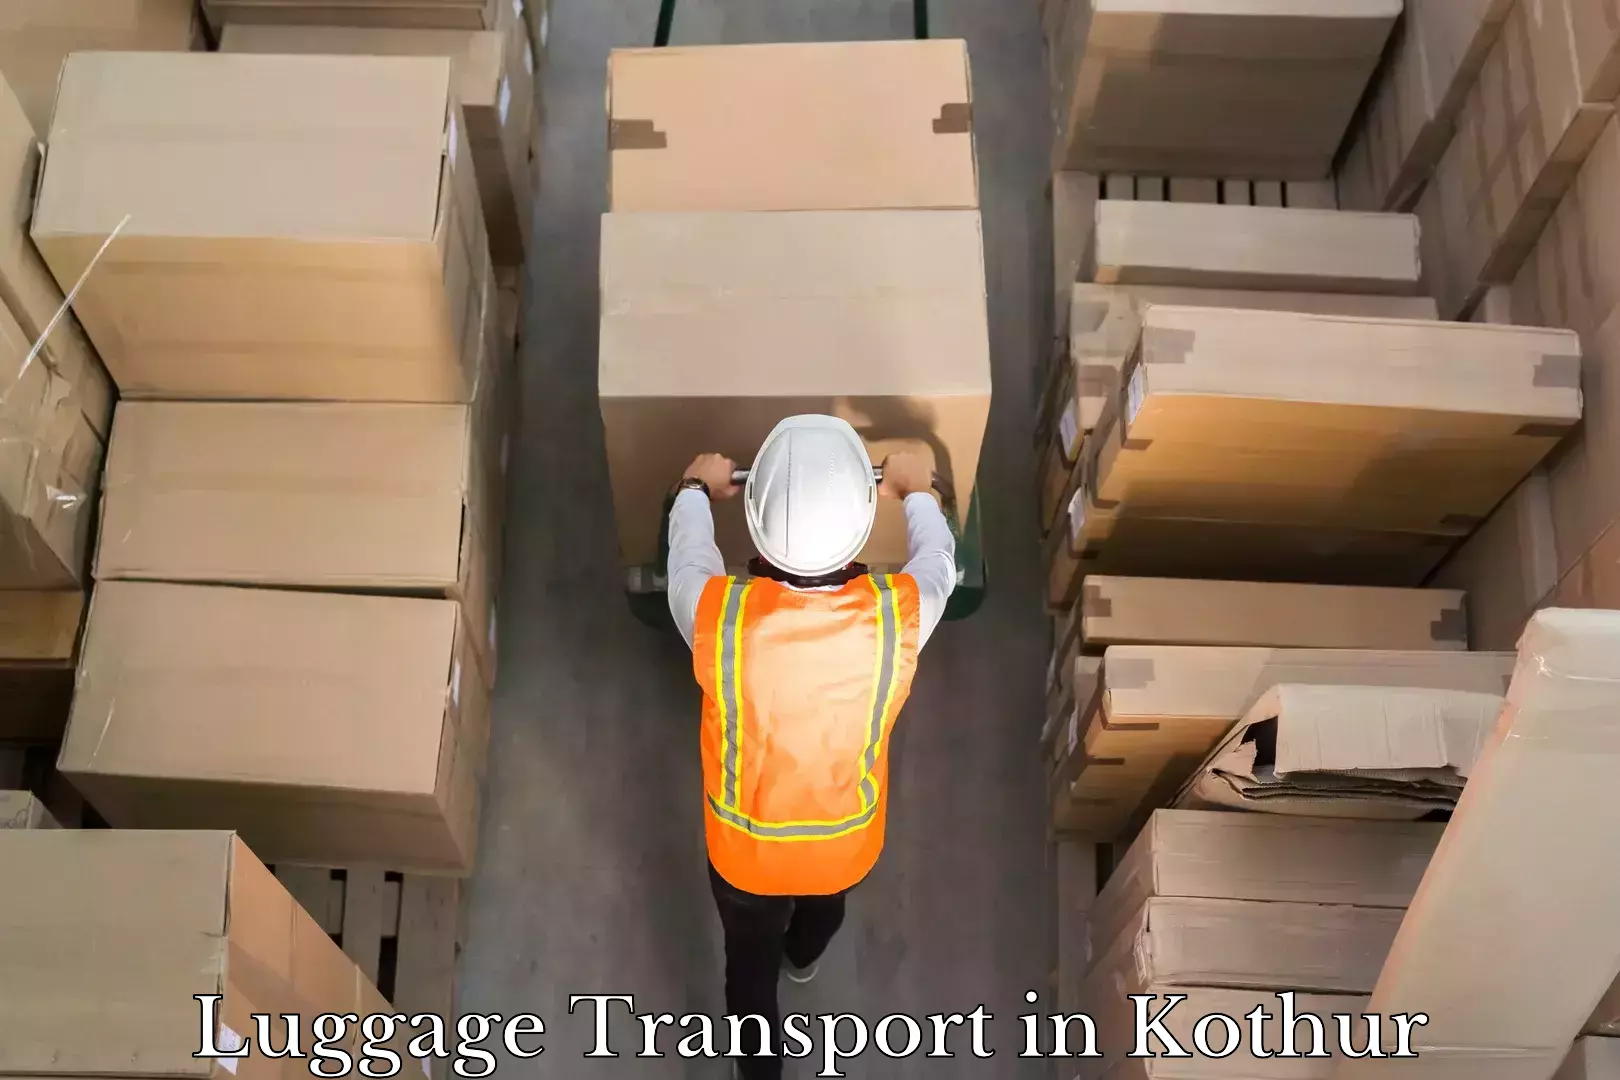 Luggage transport company in Kothur